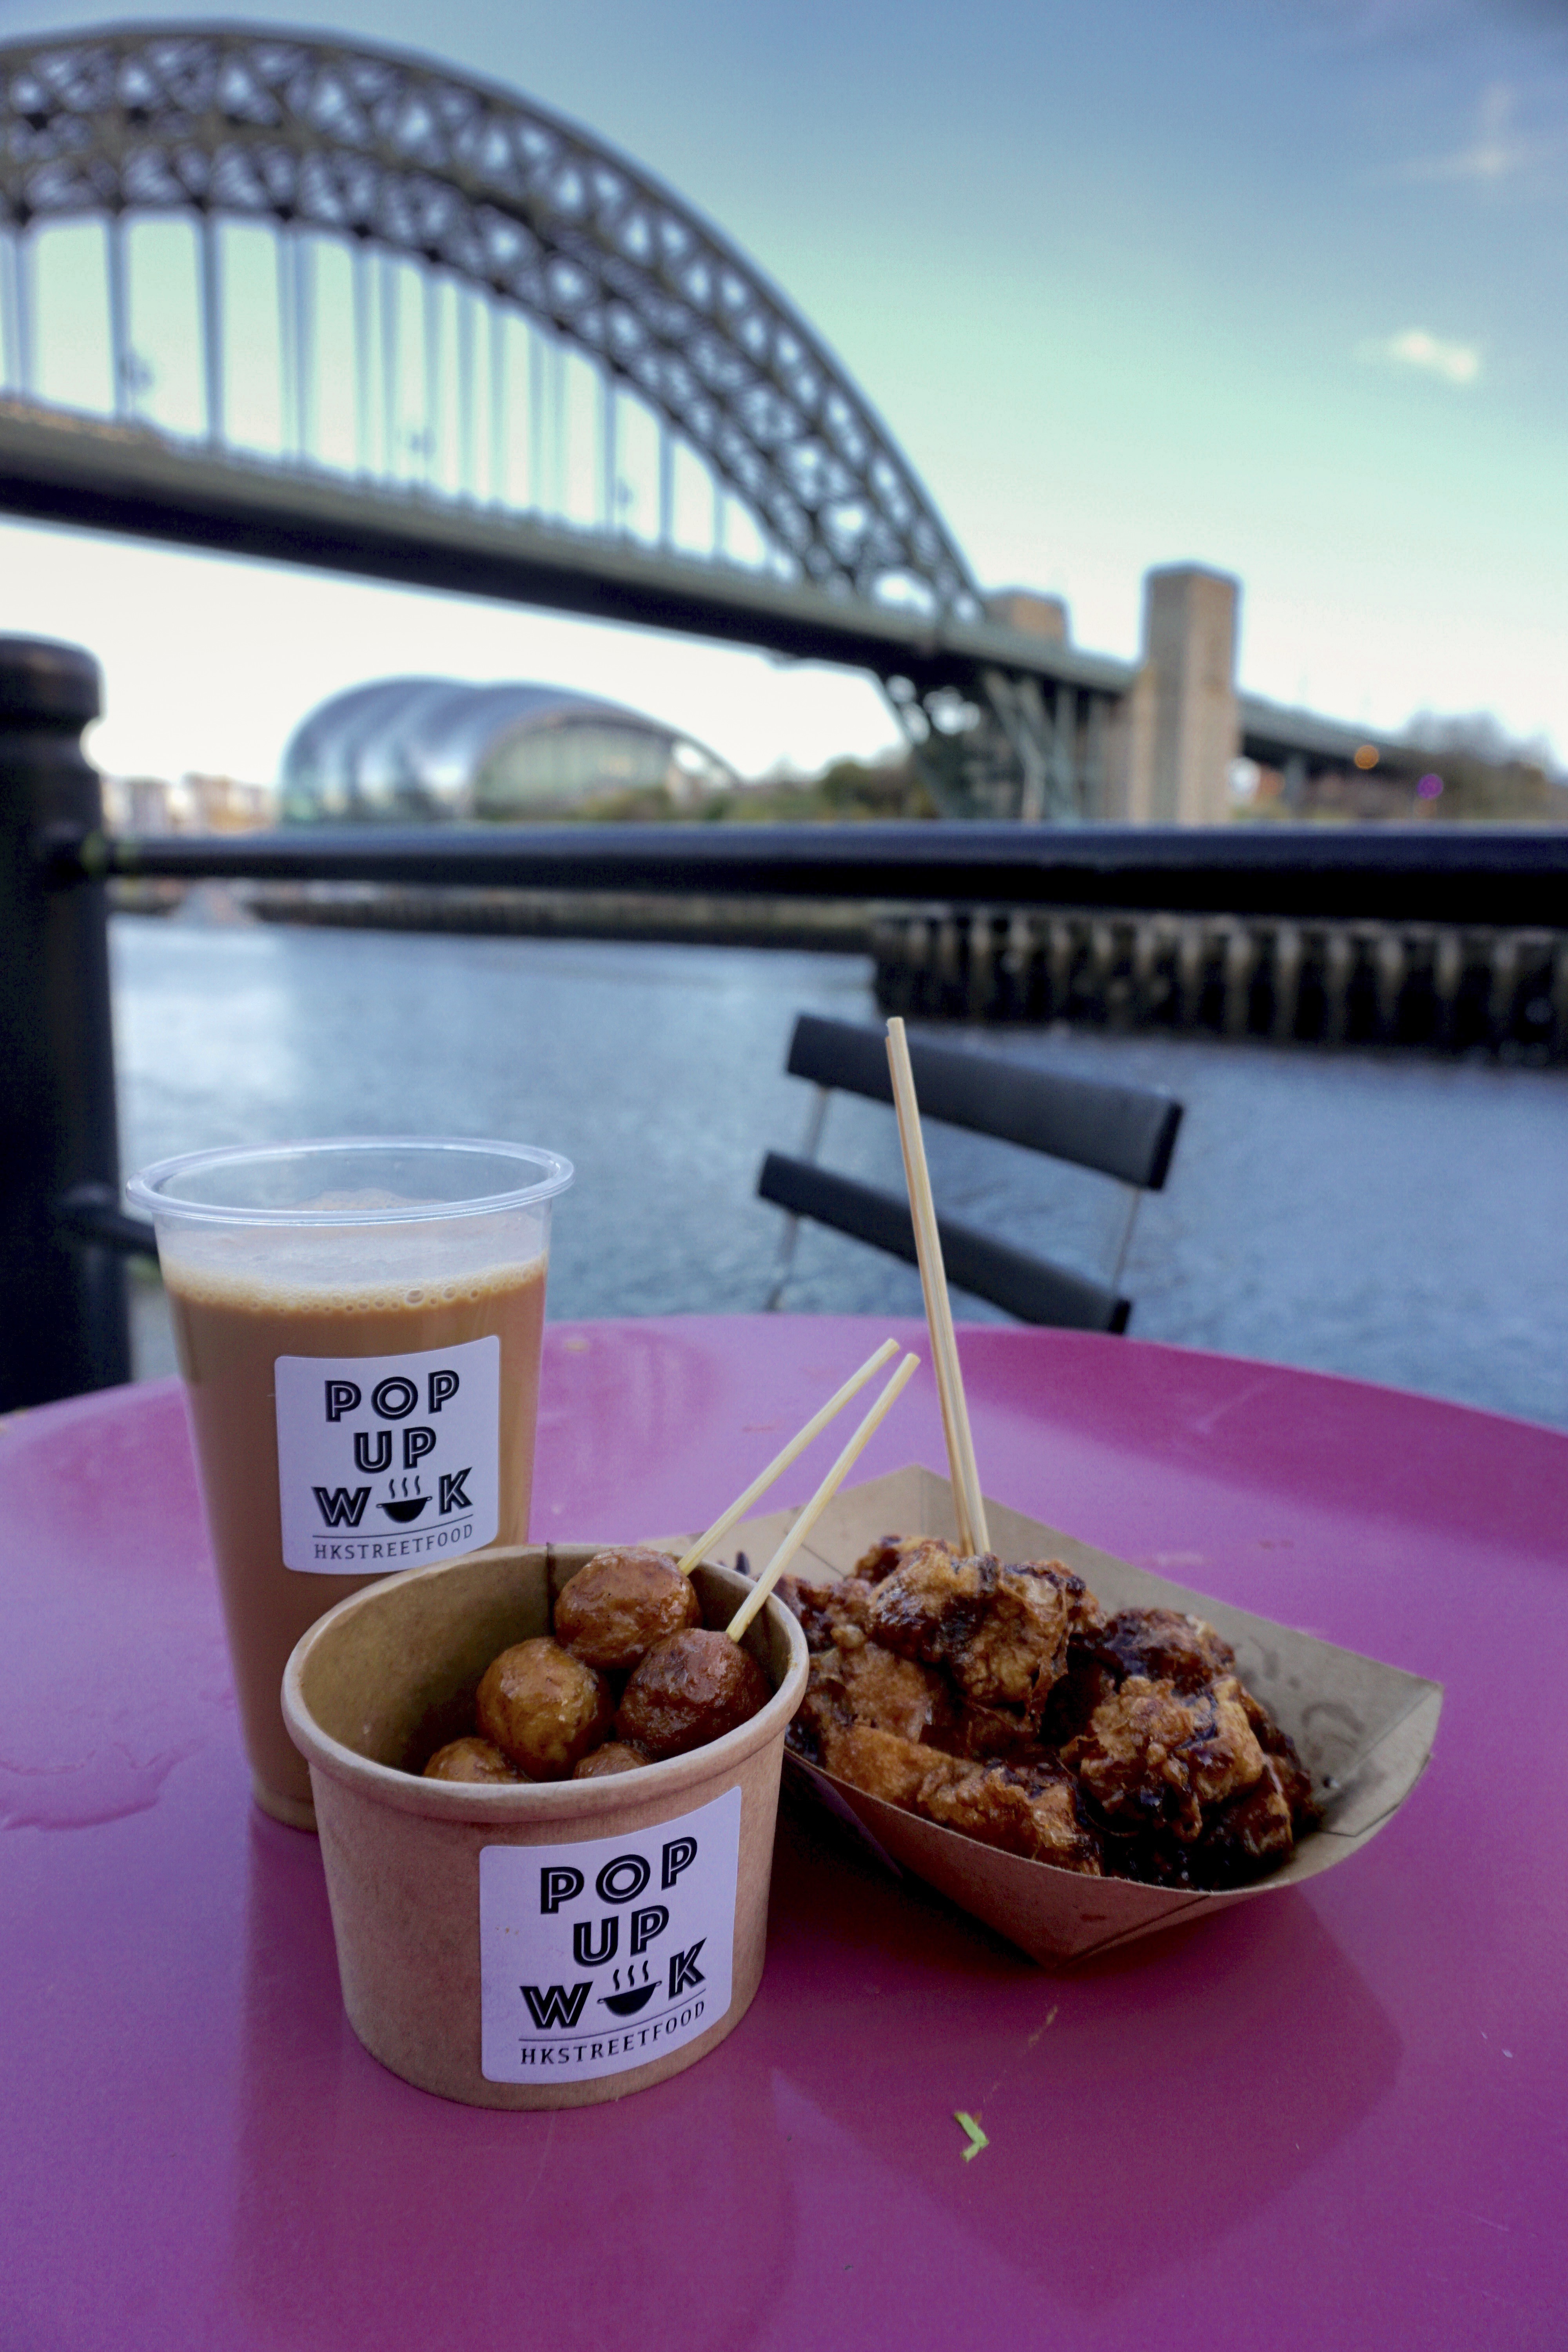 Bubblewrap in London began as a student business project, and adapted egg waffles recipe to fit UK tastes; Pop Up Wok in Newcastle, started by homesick Hongkongers, serves silk stocking tea and snacks like curried fish balls